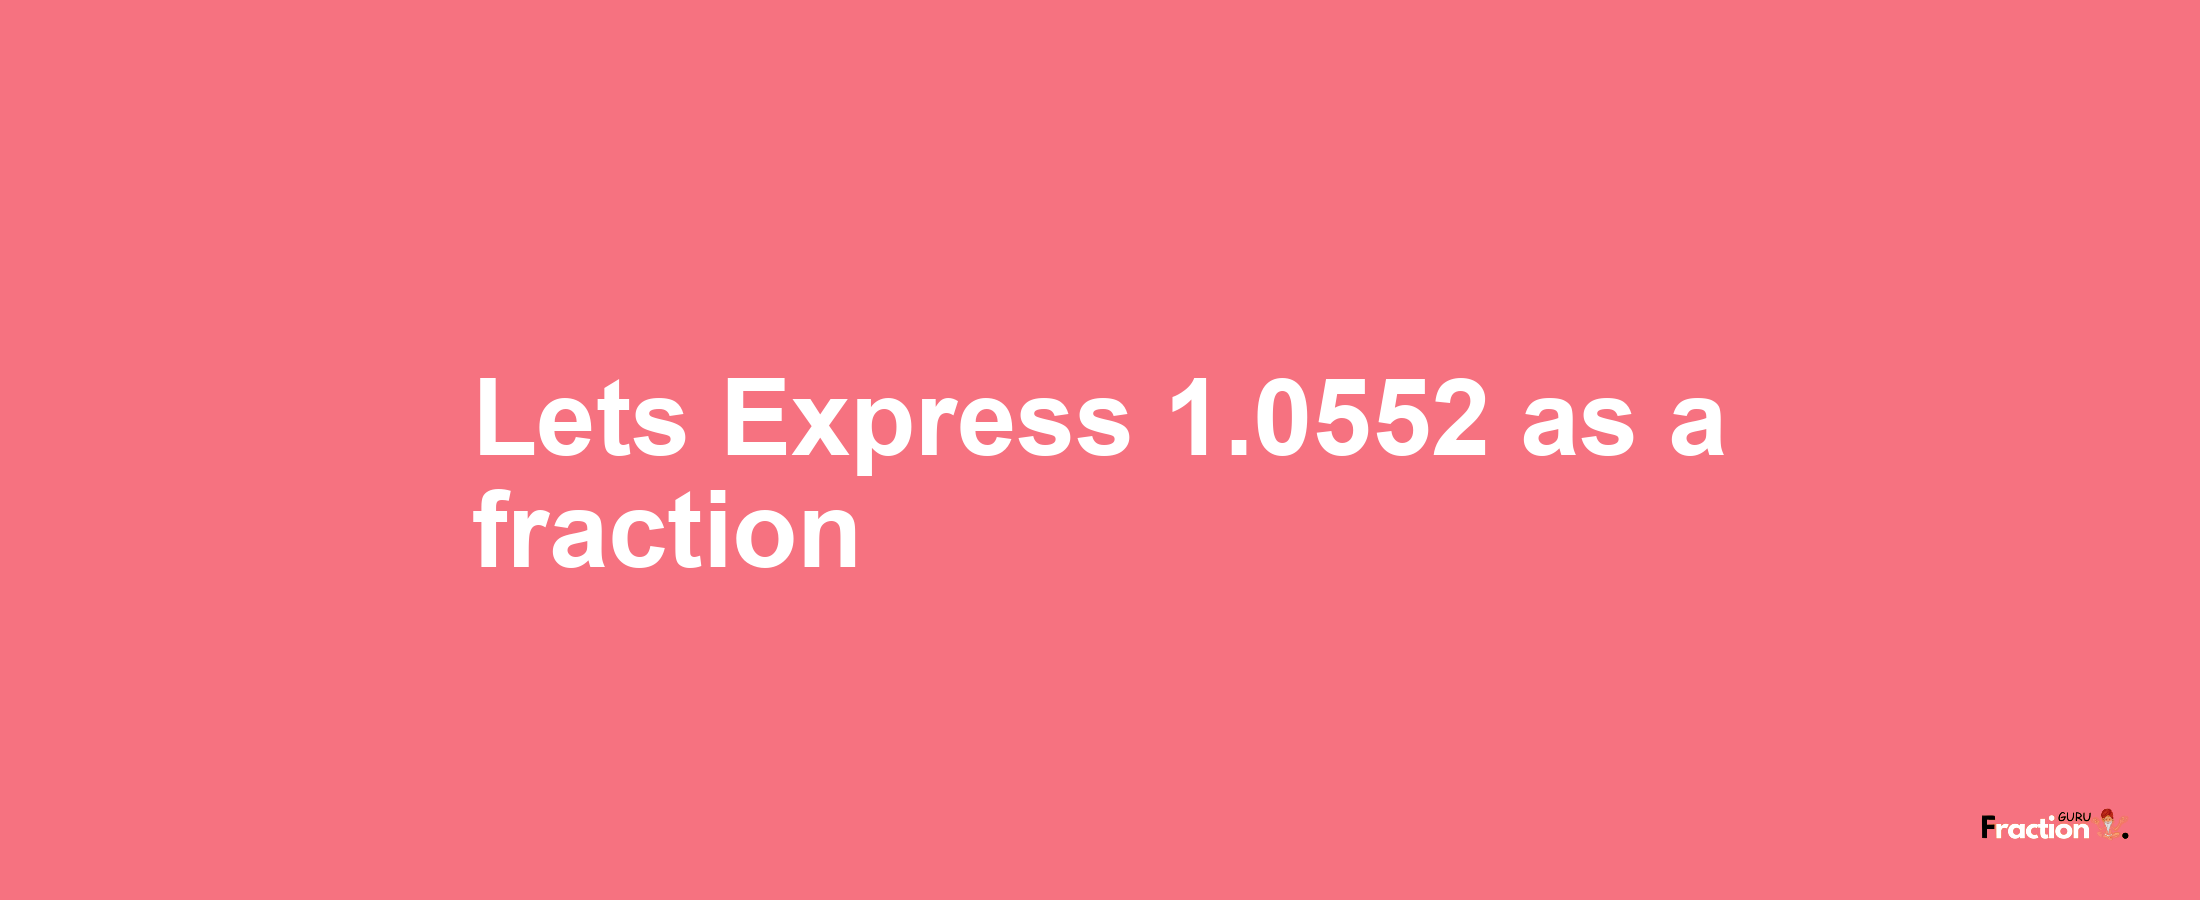 Lets Express 1.0552 as afraction